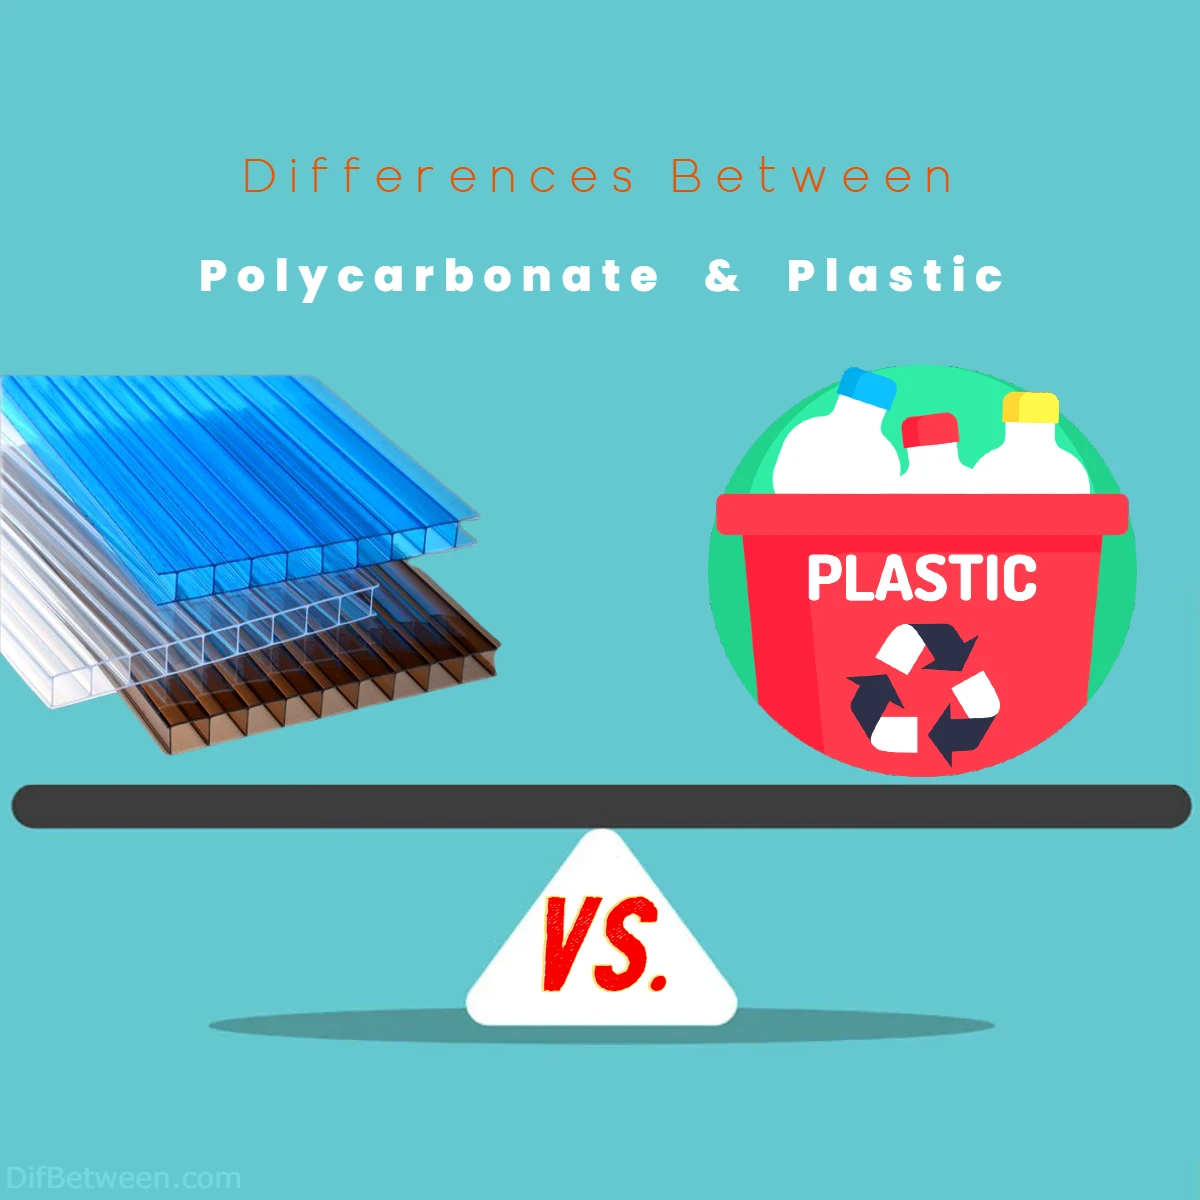 Differences Between Polycarbonate vs Plastic